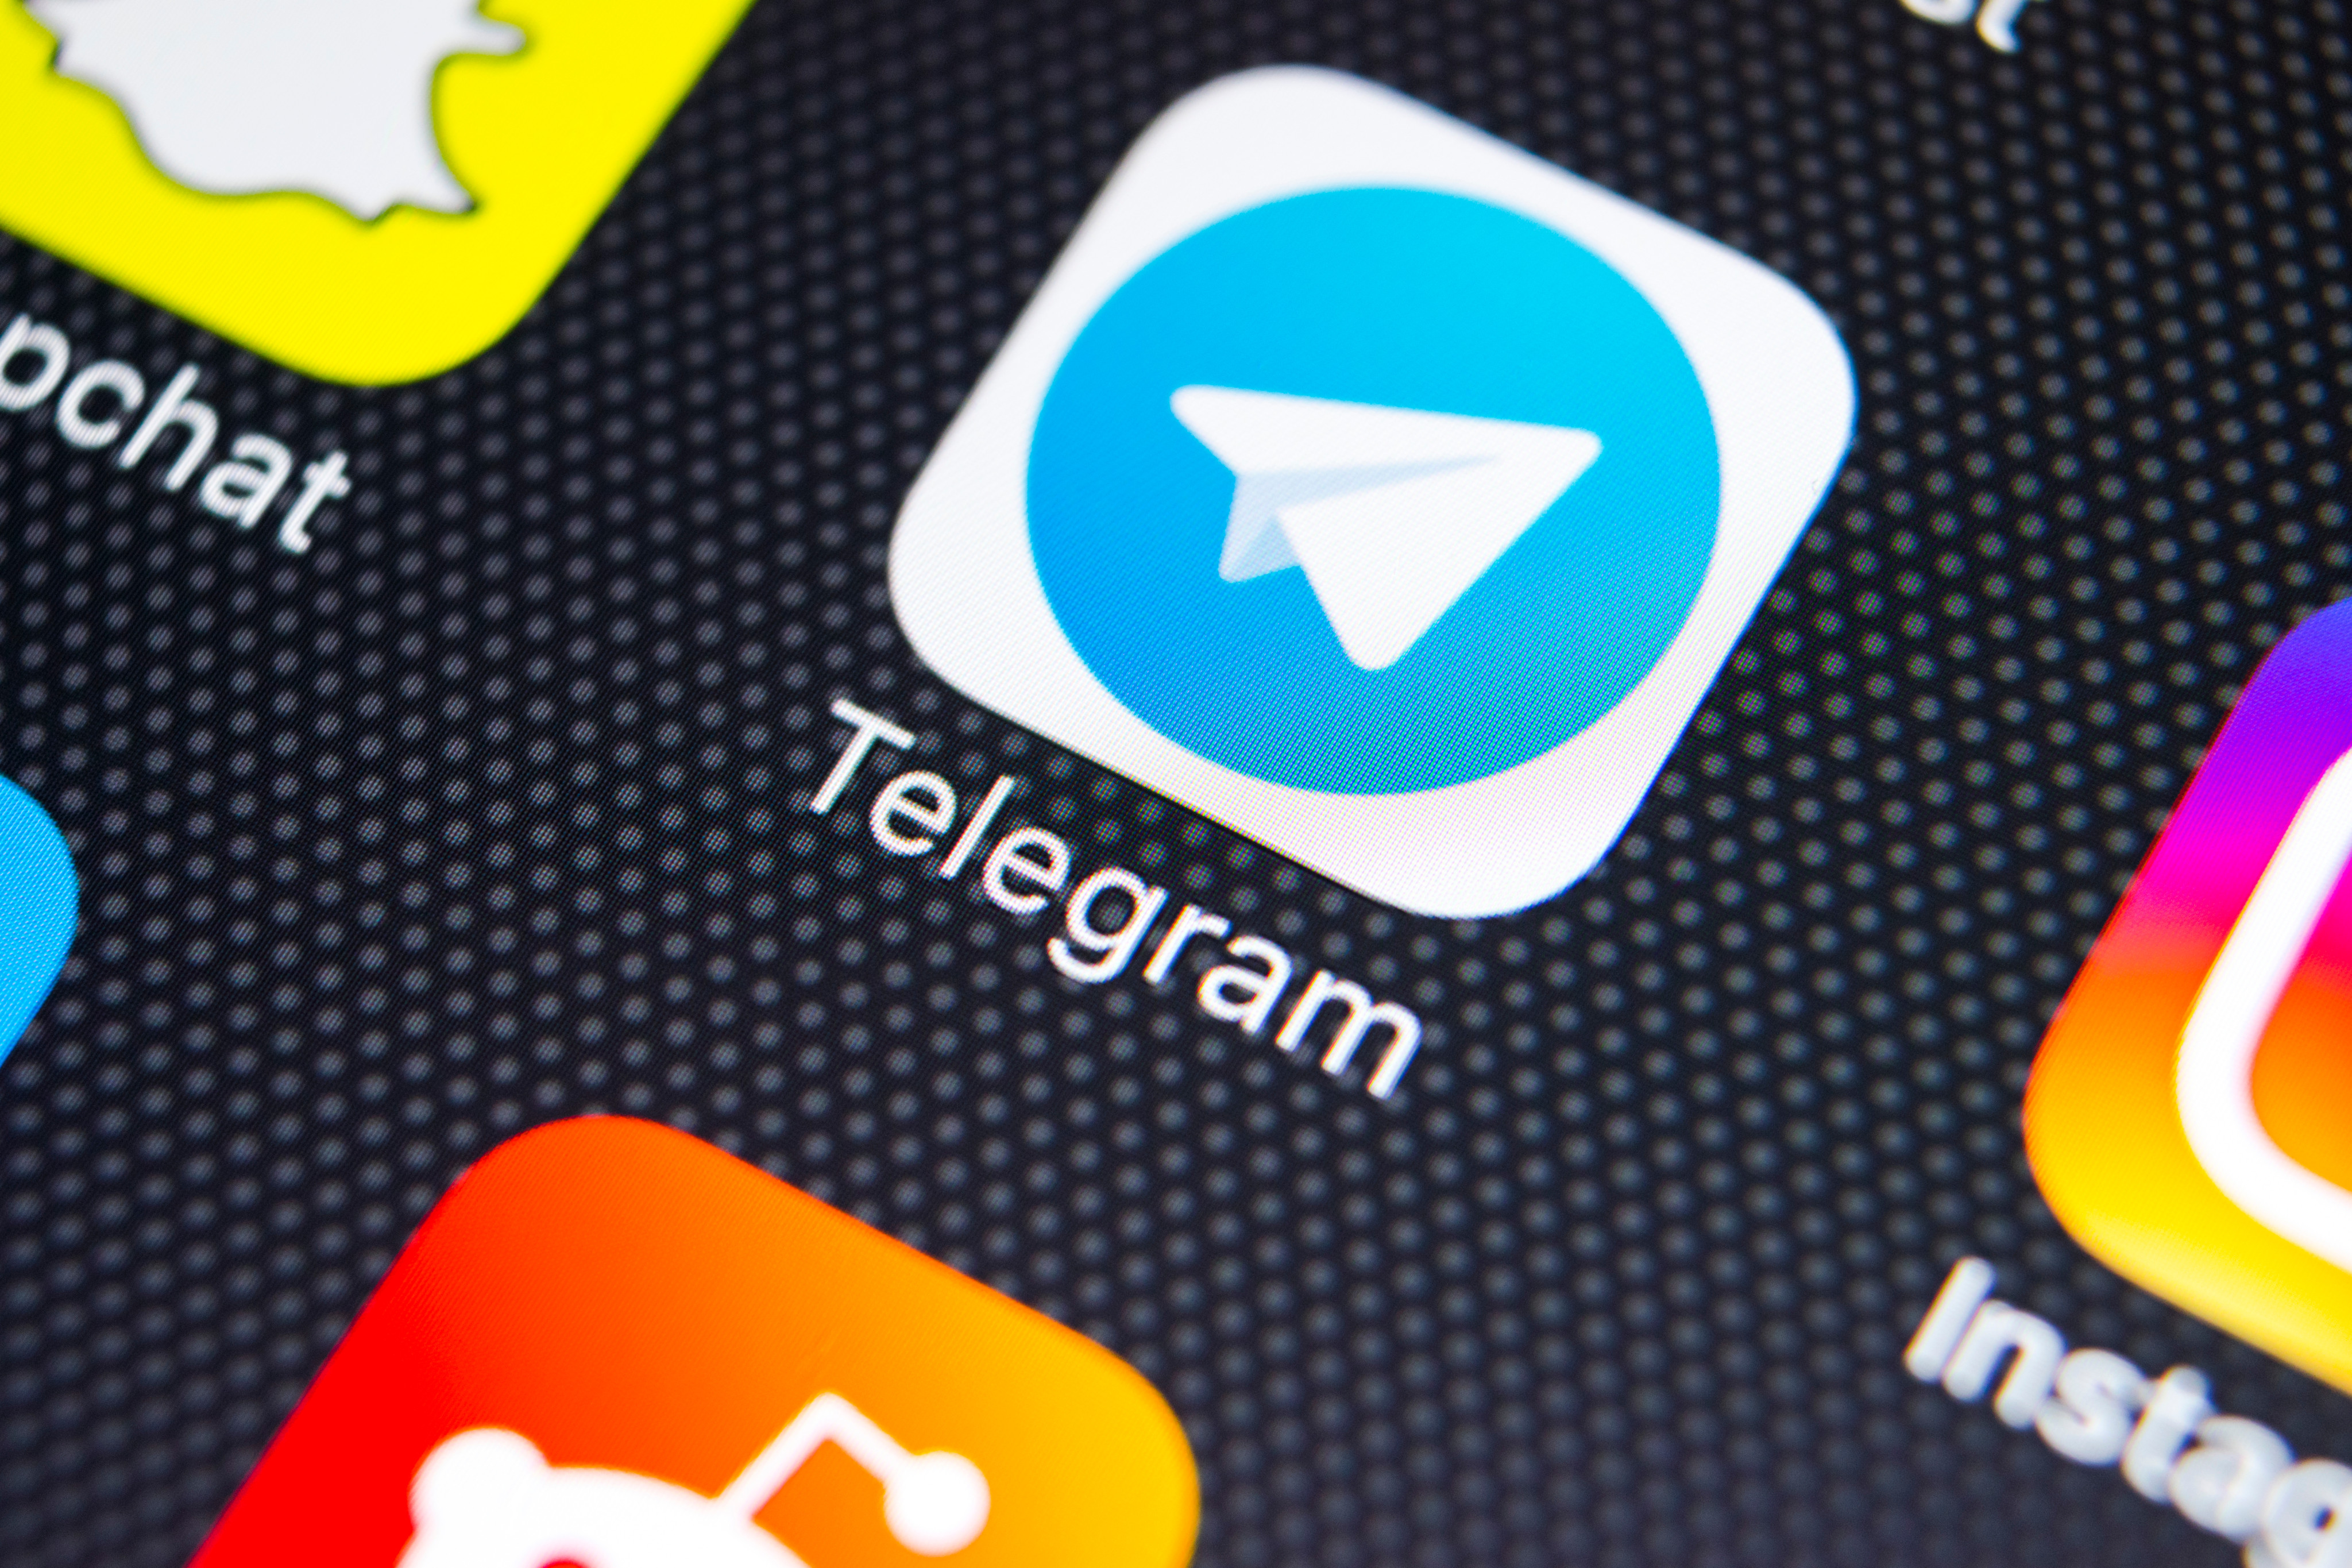 Hui Chi-kit faces charges relating to his role as the administrator of the “engineernoextradition” channel on Telegram. Photo: Shutterstock 